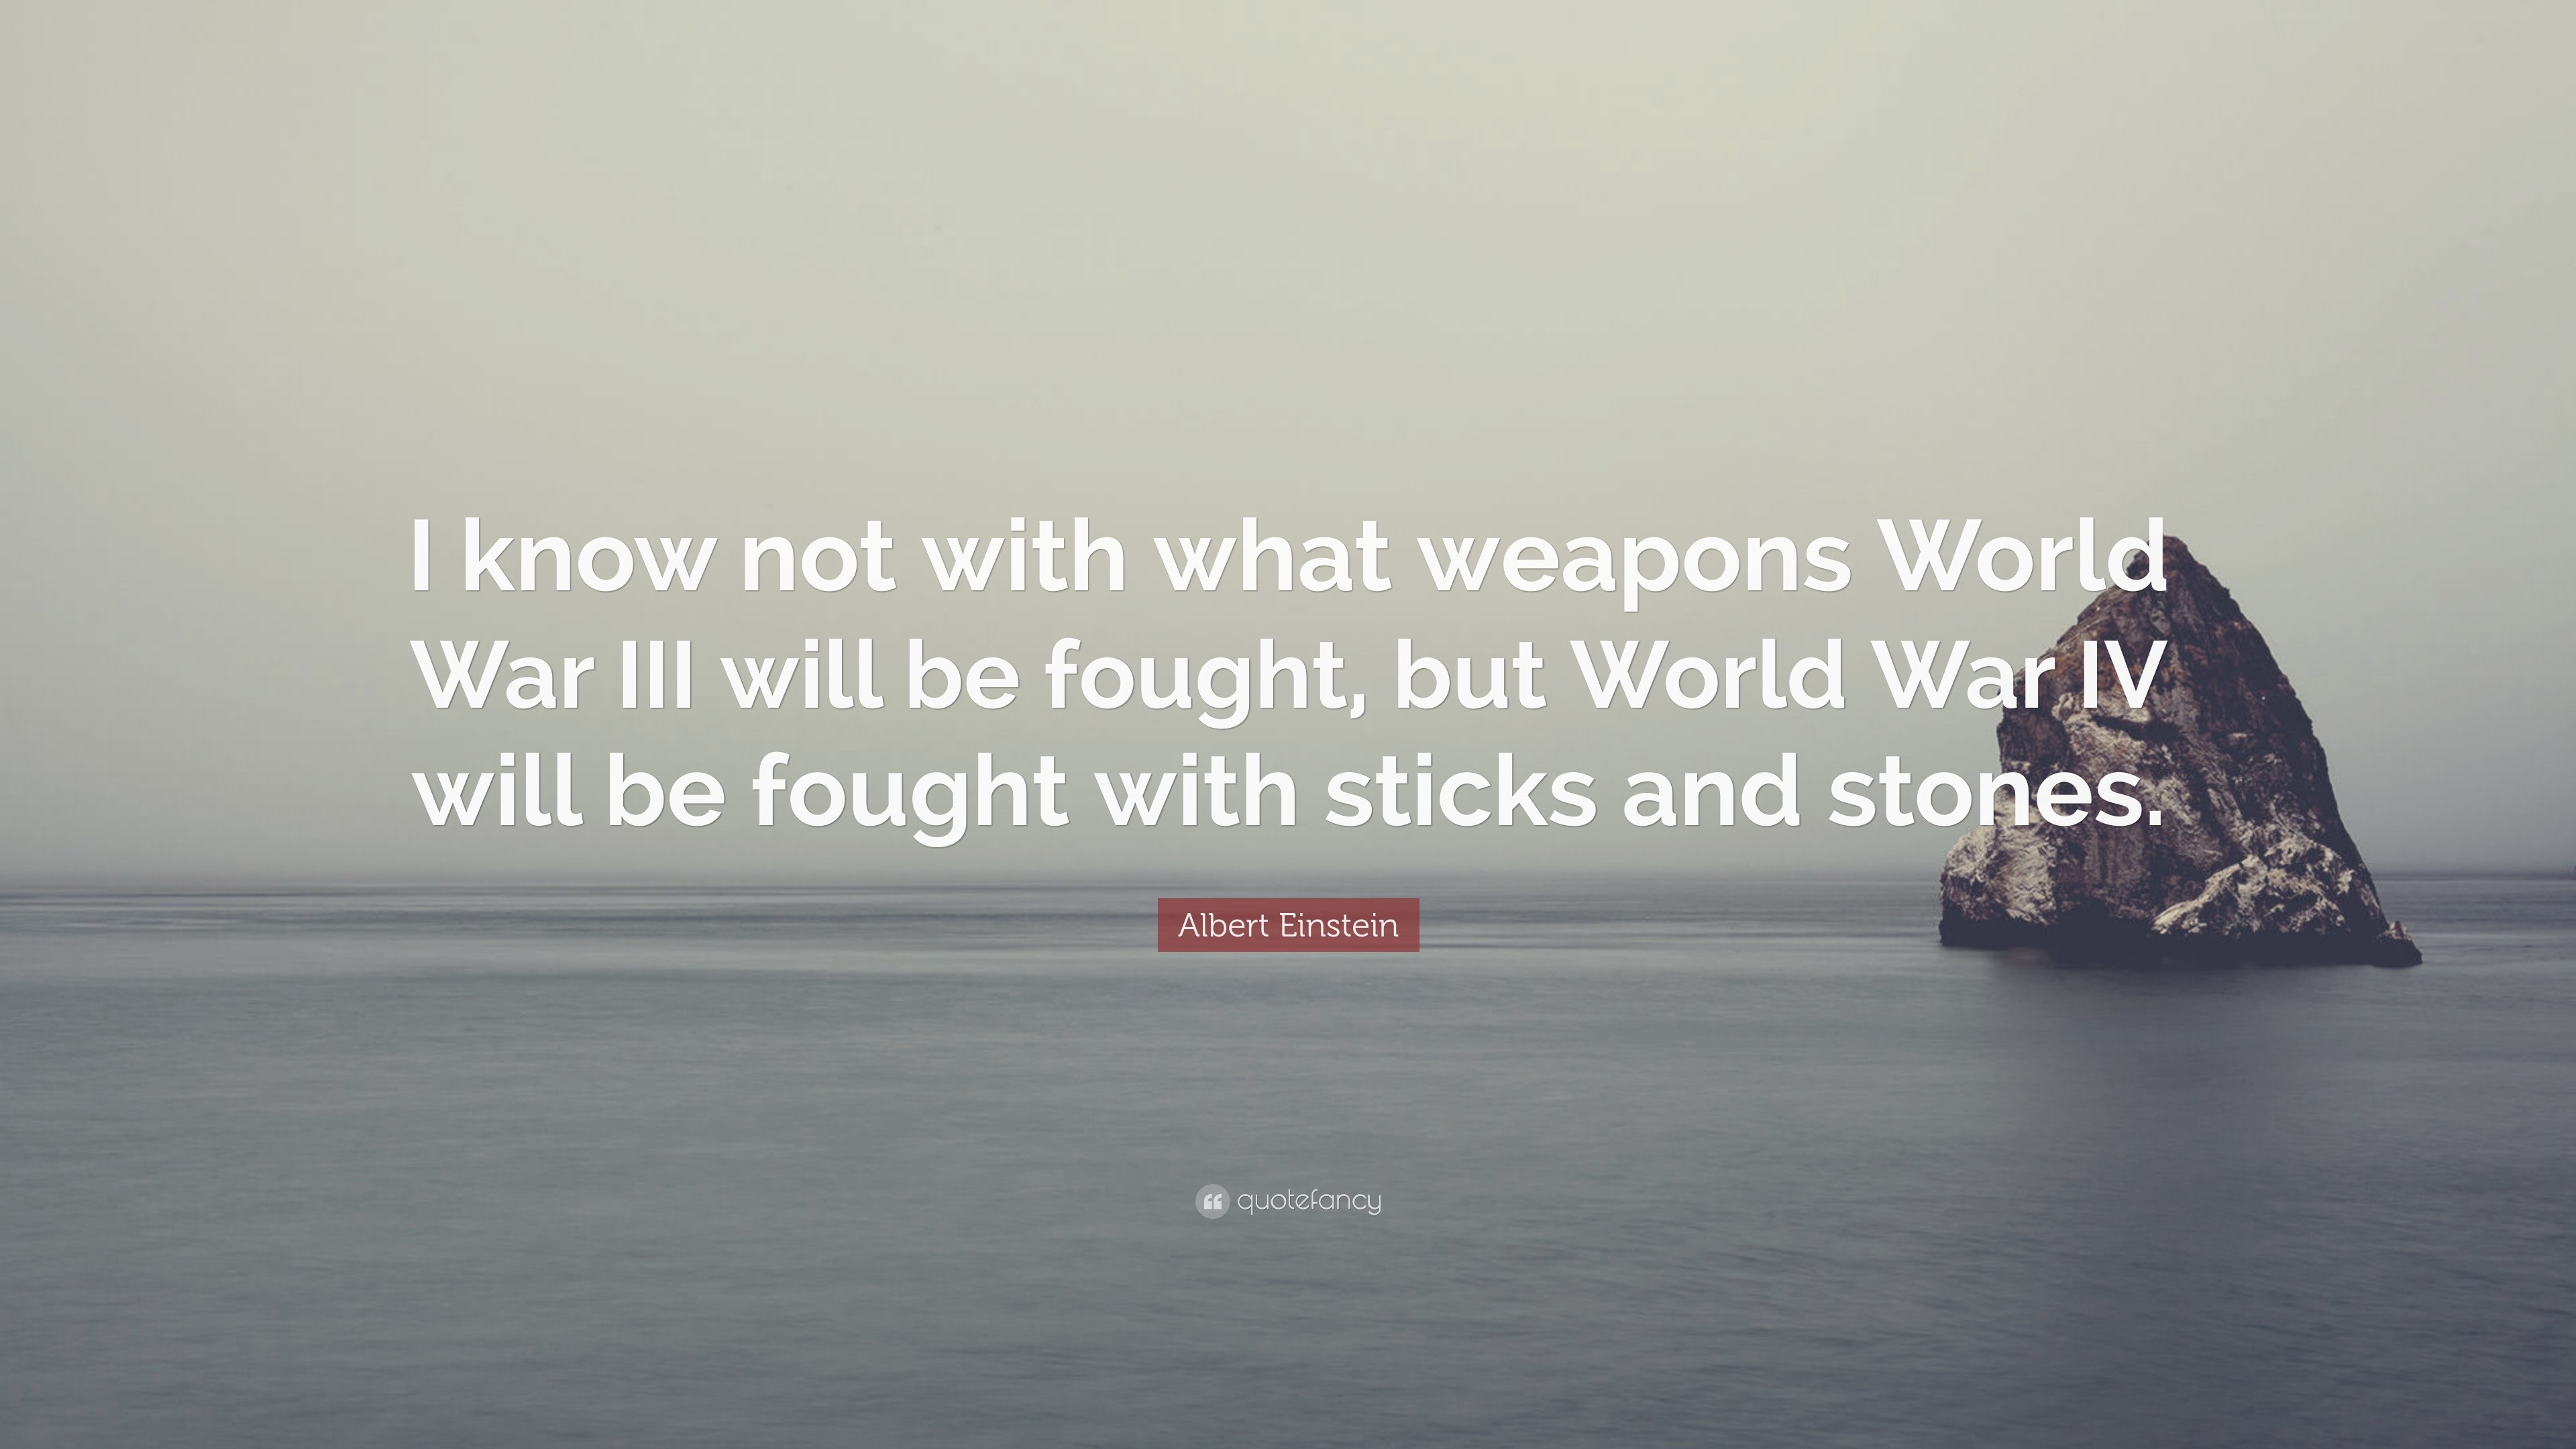 Albert Einstein Quote: “I know not with what weapons World War III will ...